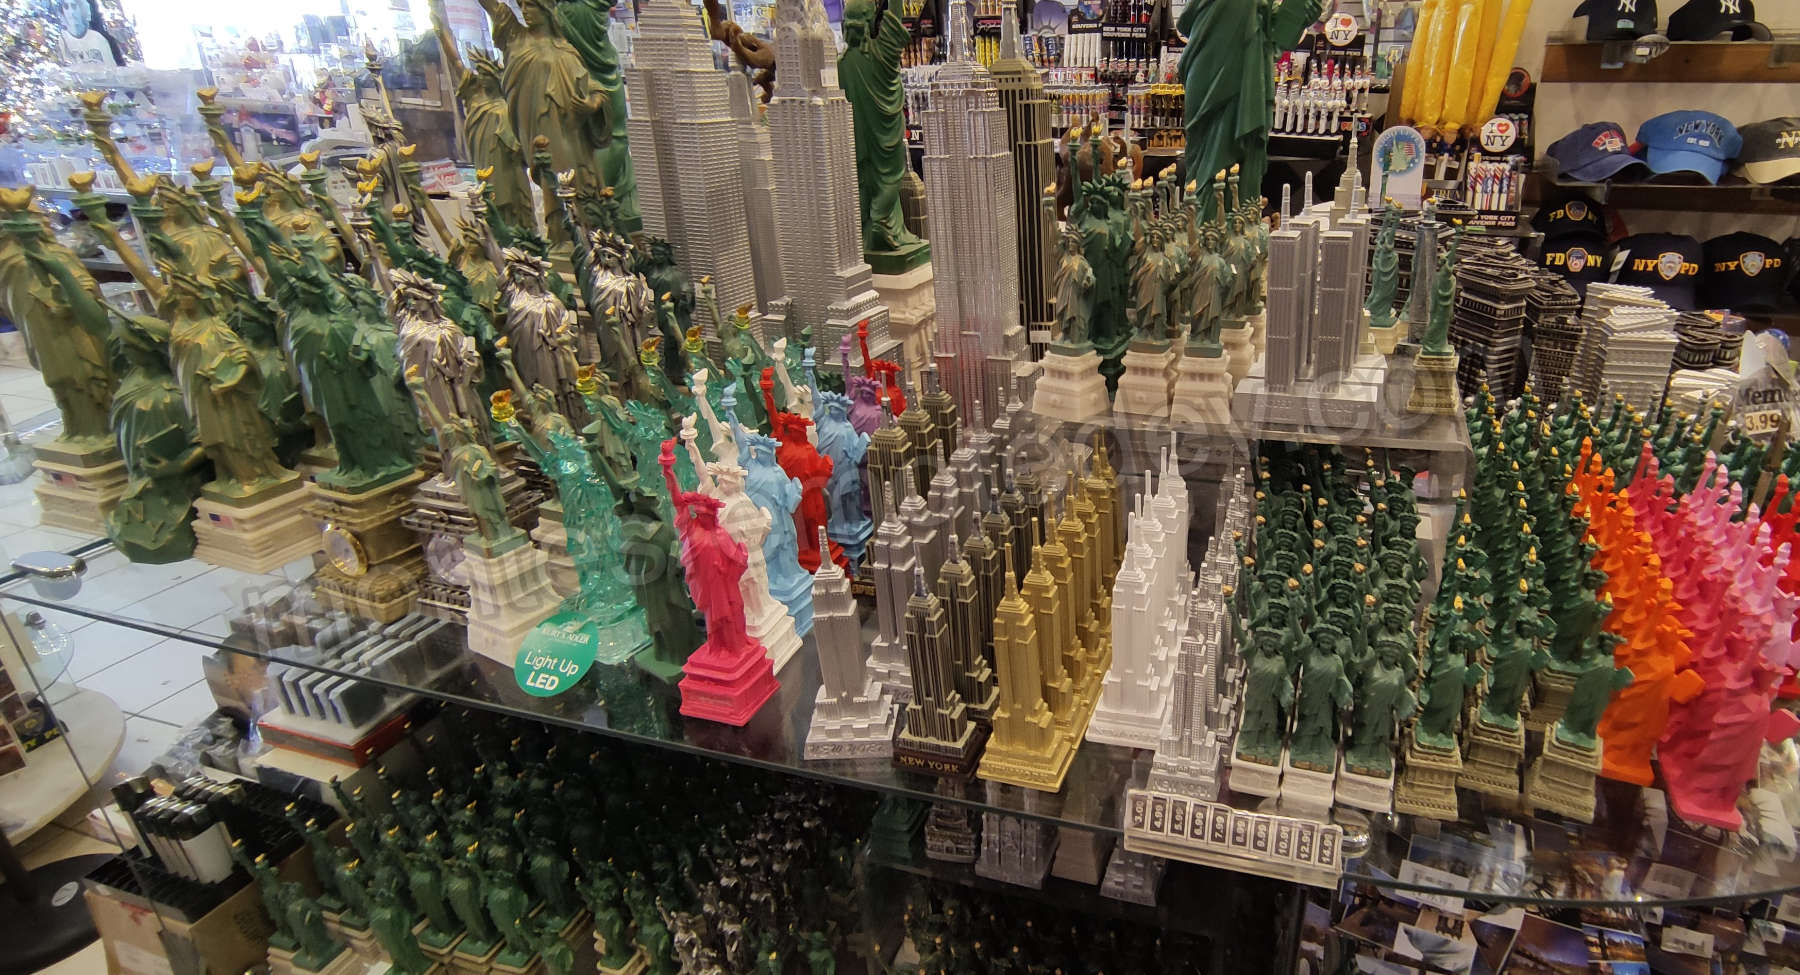 Statue of Liberty and Empire State figures